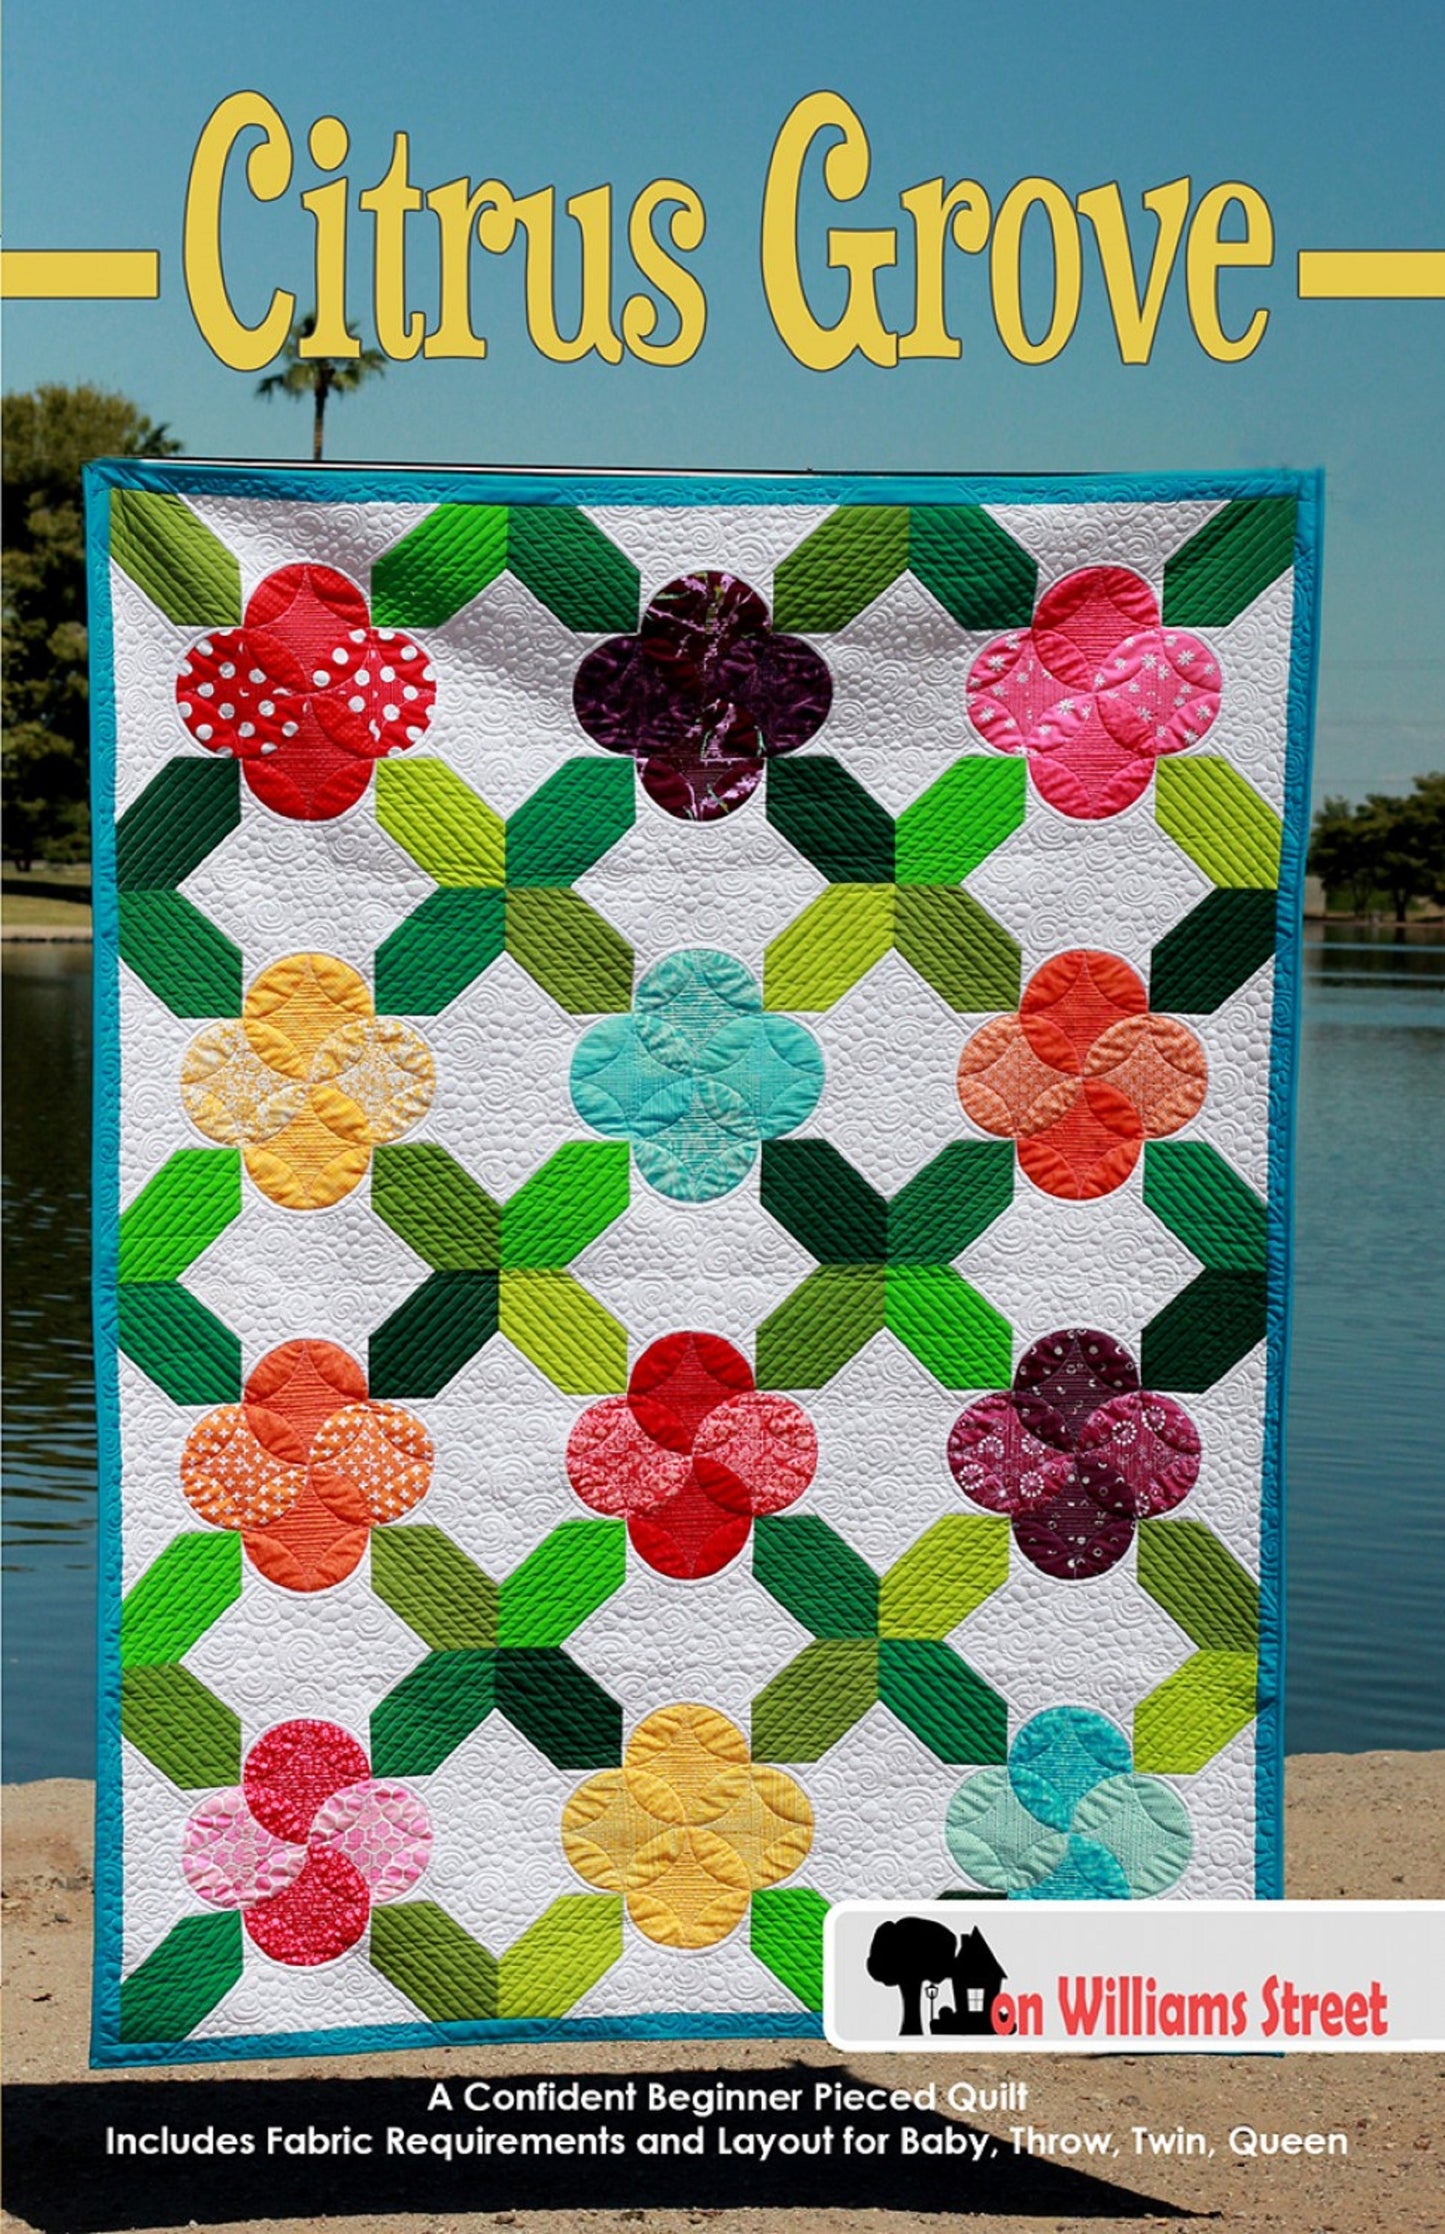 Citrus Grove Quilt Pattern by On Williams Street